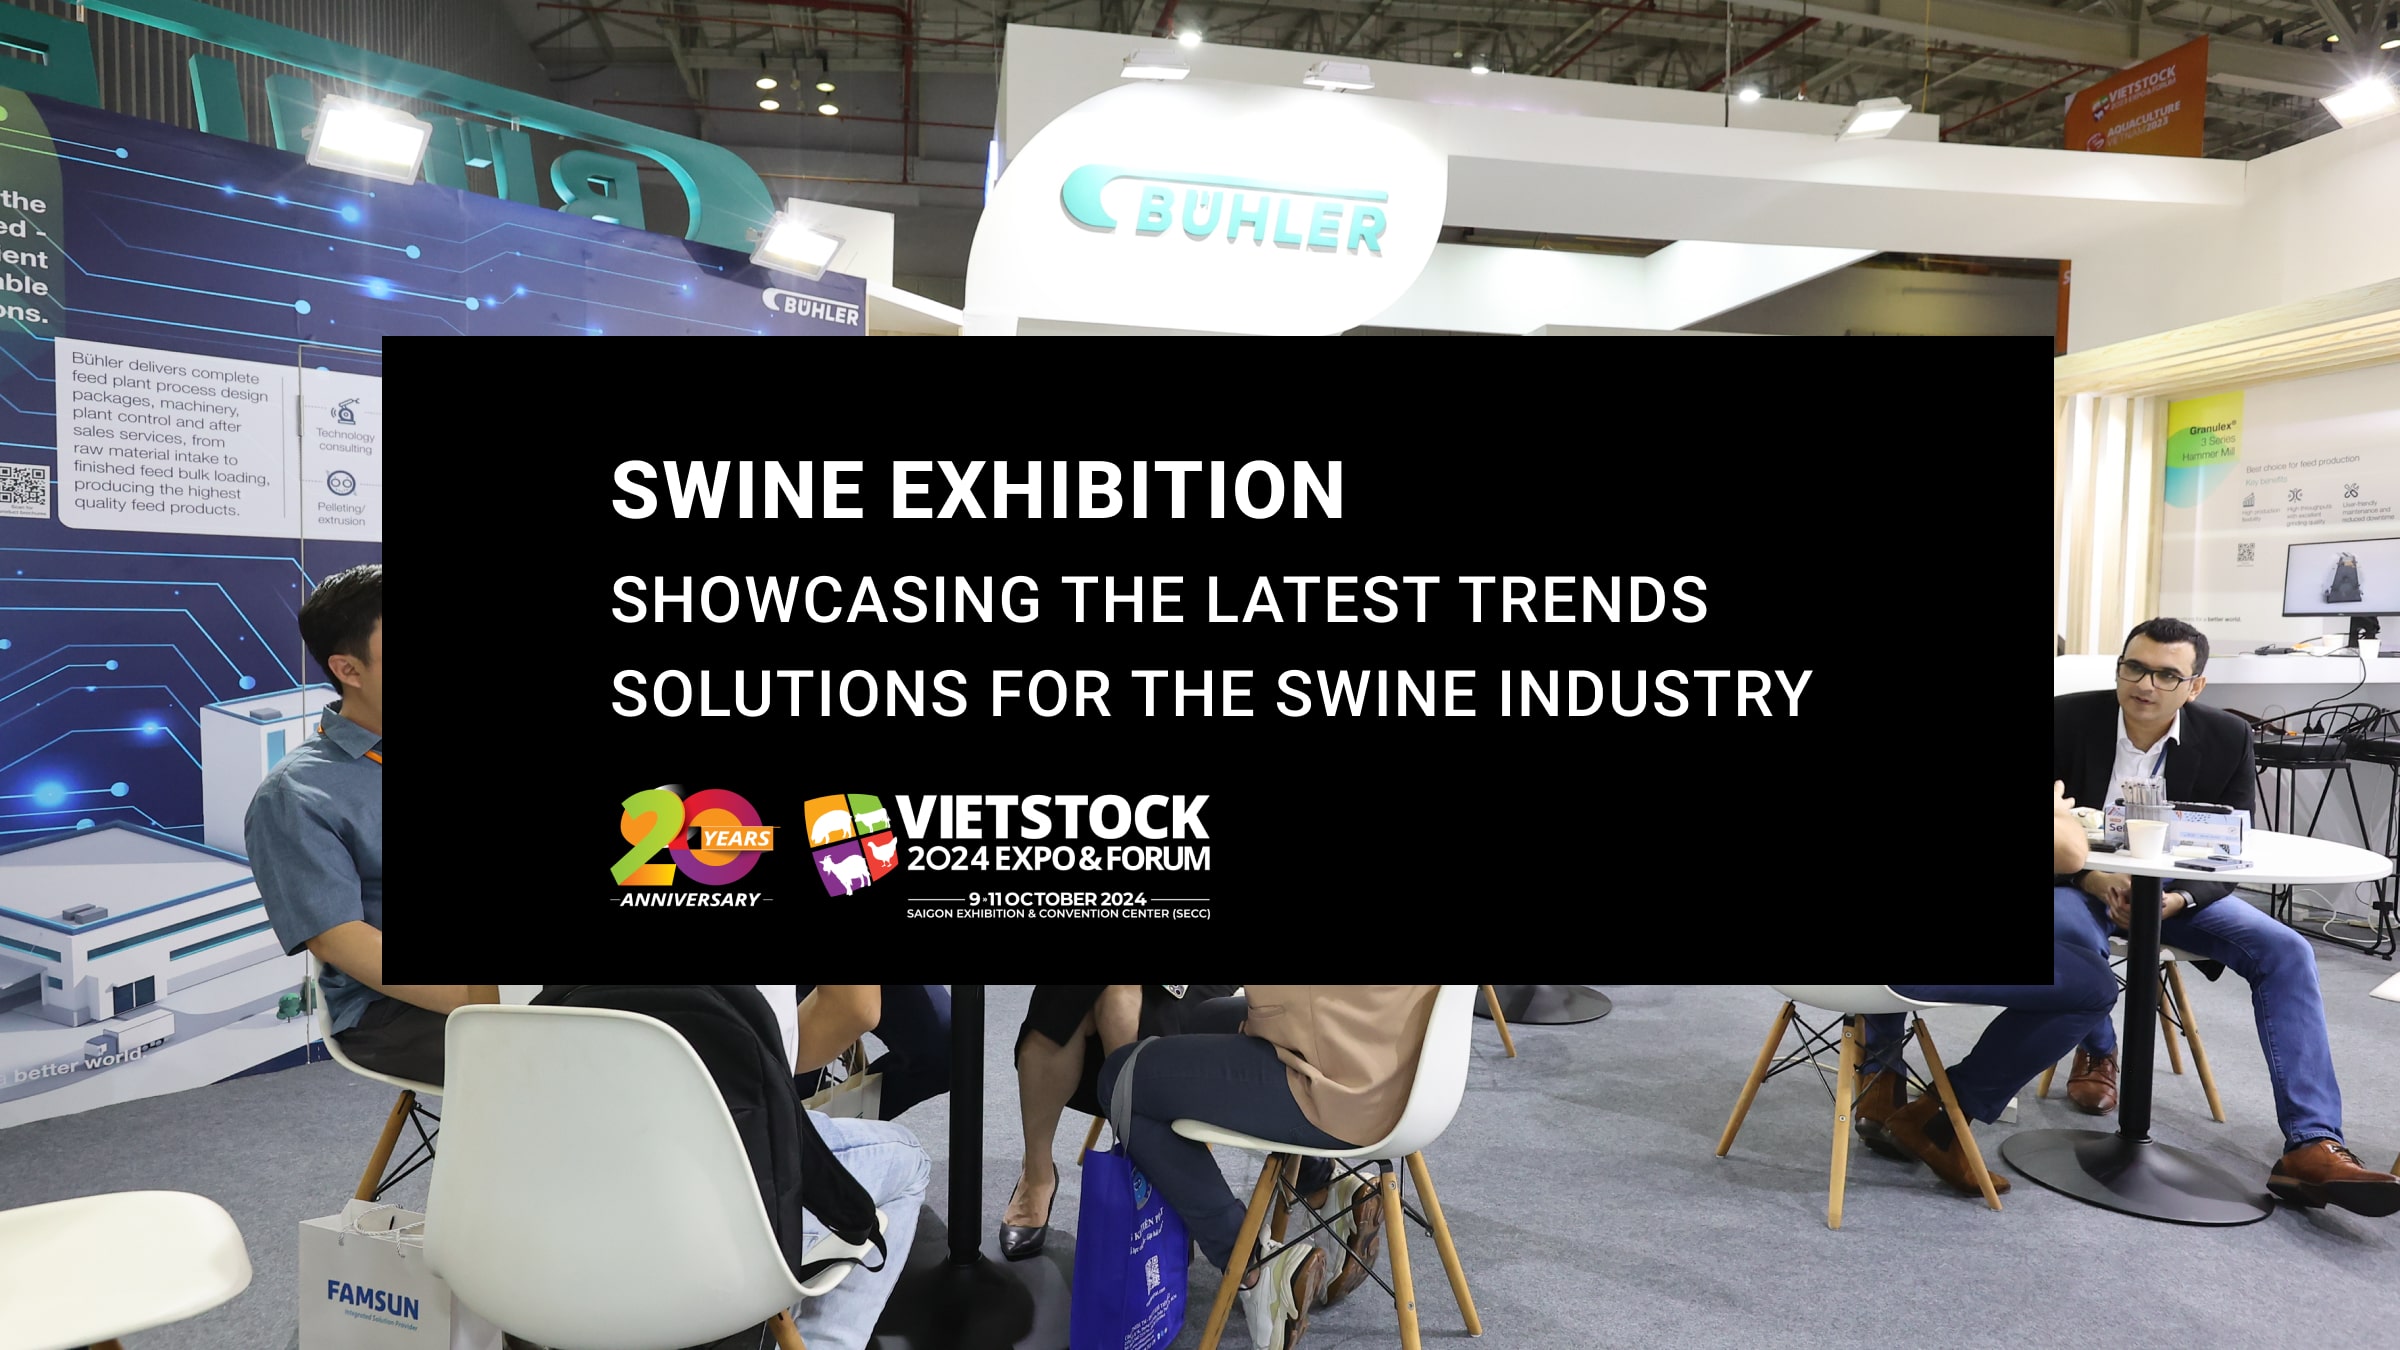 SWINE EXHIBITION – SHOWCASING THE LATEST TRENDS AND SOLUTIONS FOR THE SWINE INDUSTRY